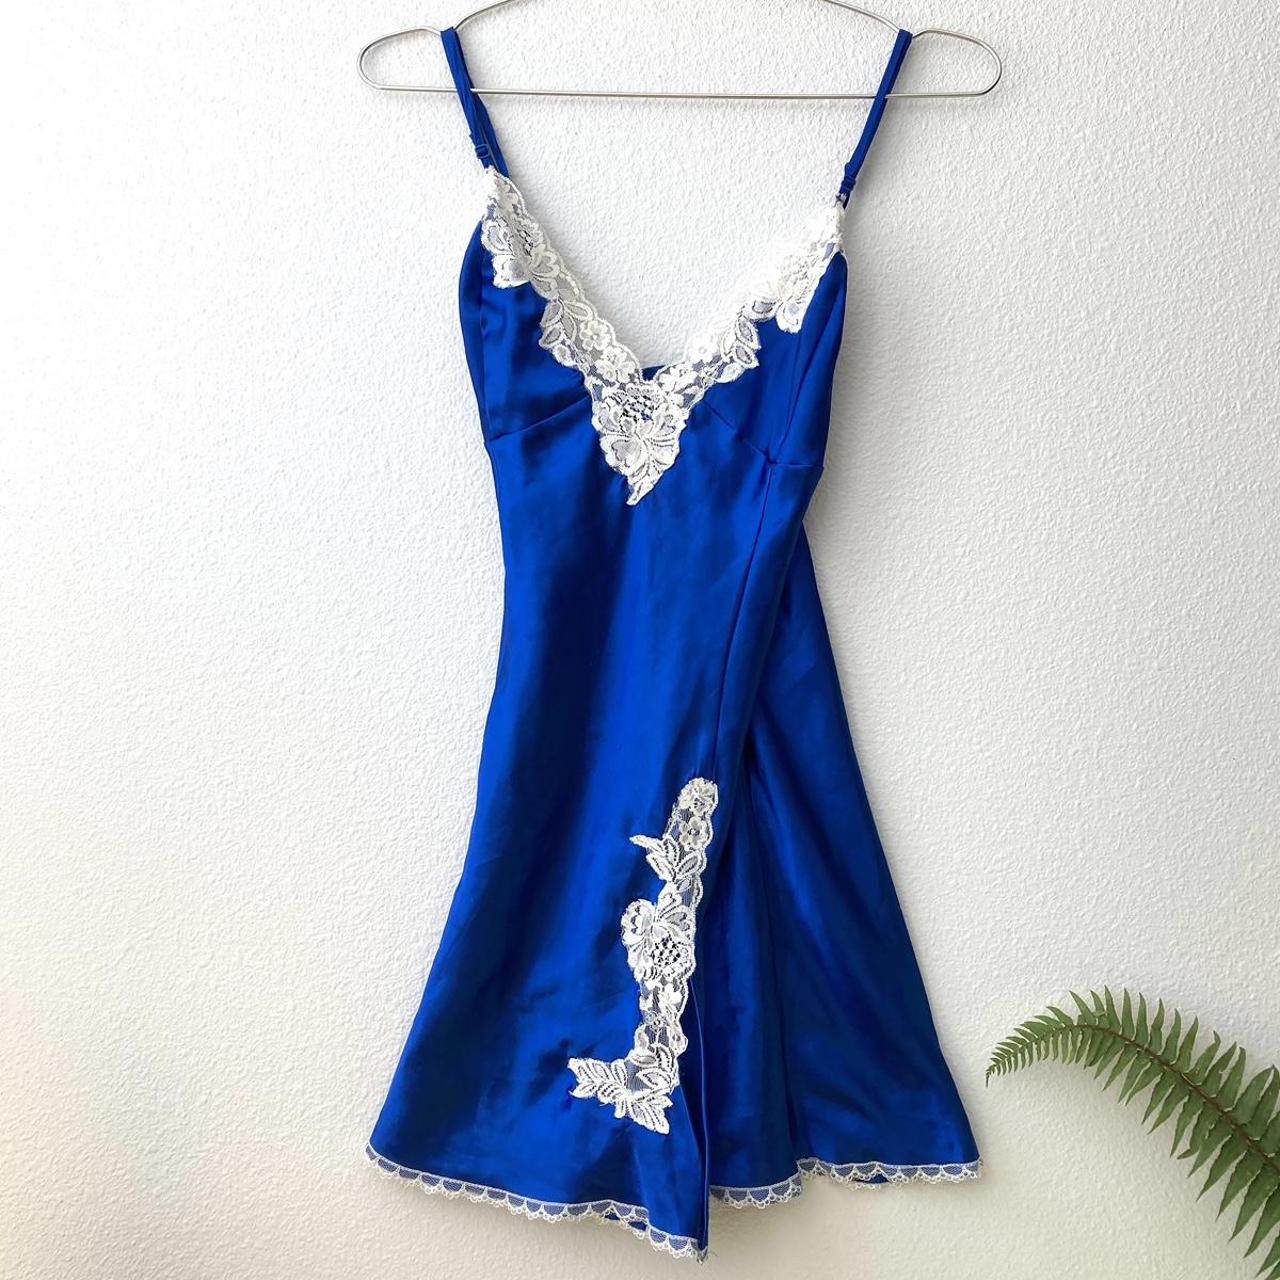 Fredericks of Hollywood vintage royal blue and white